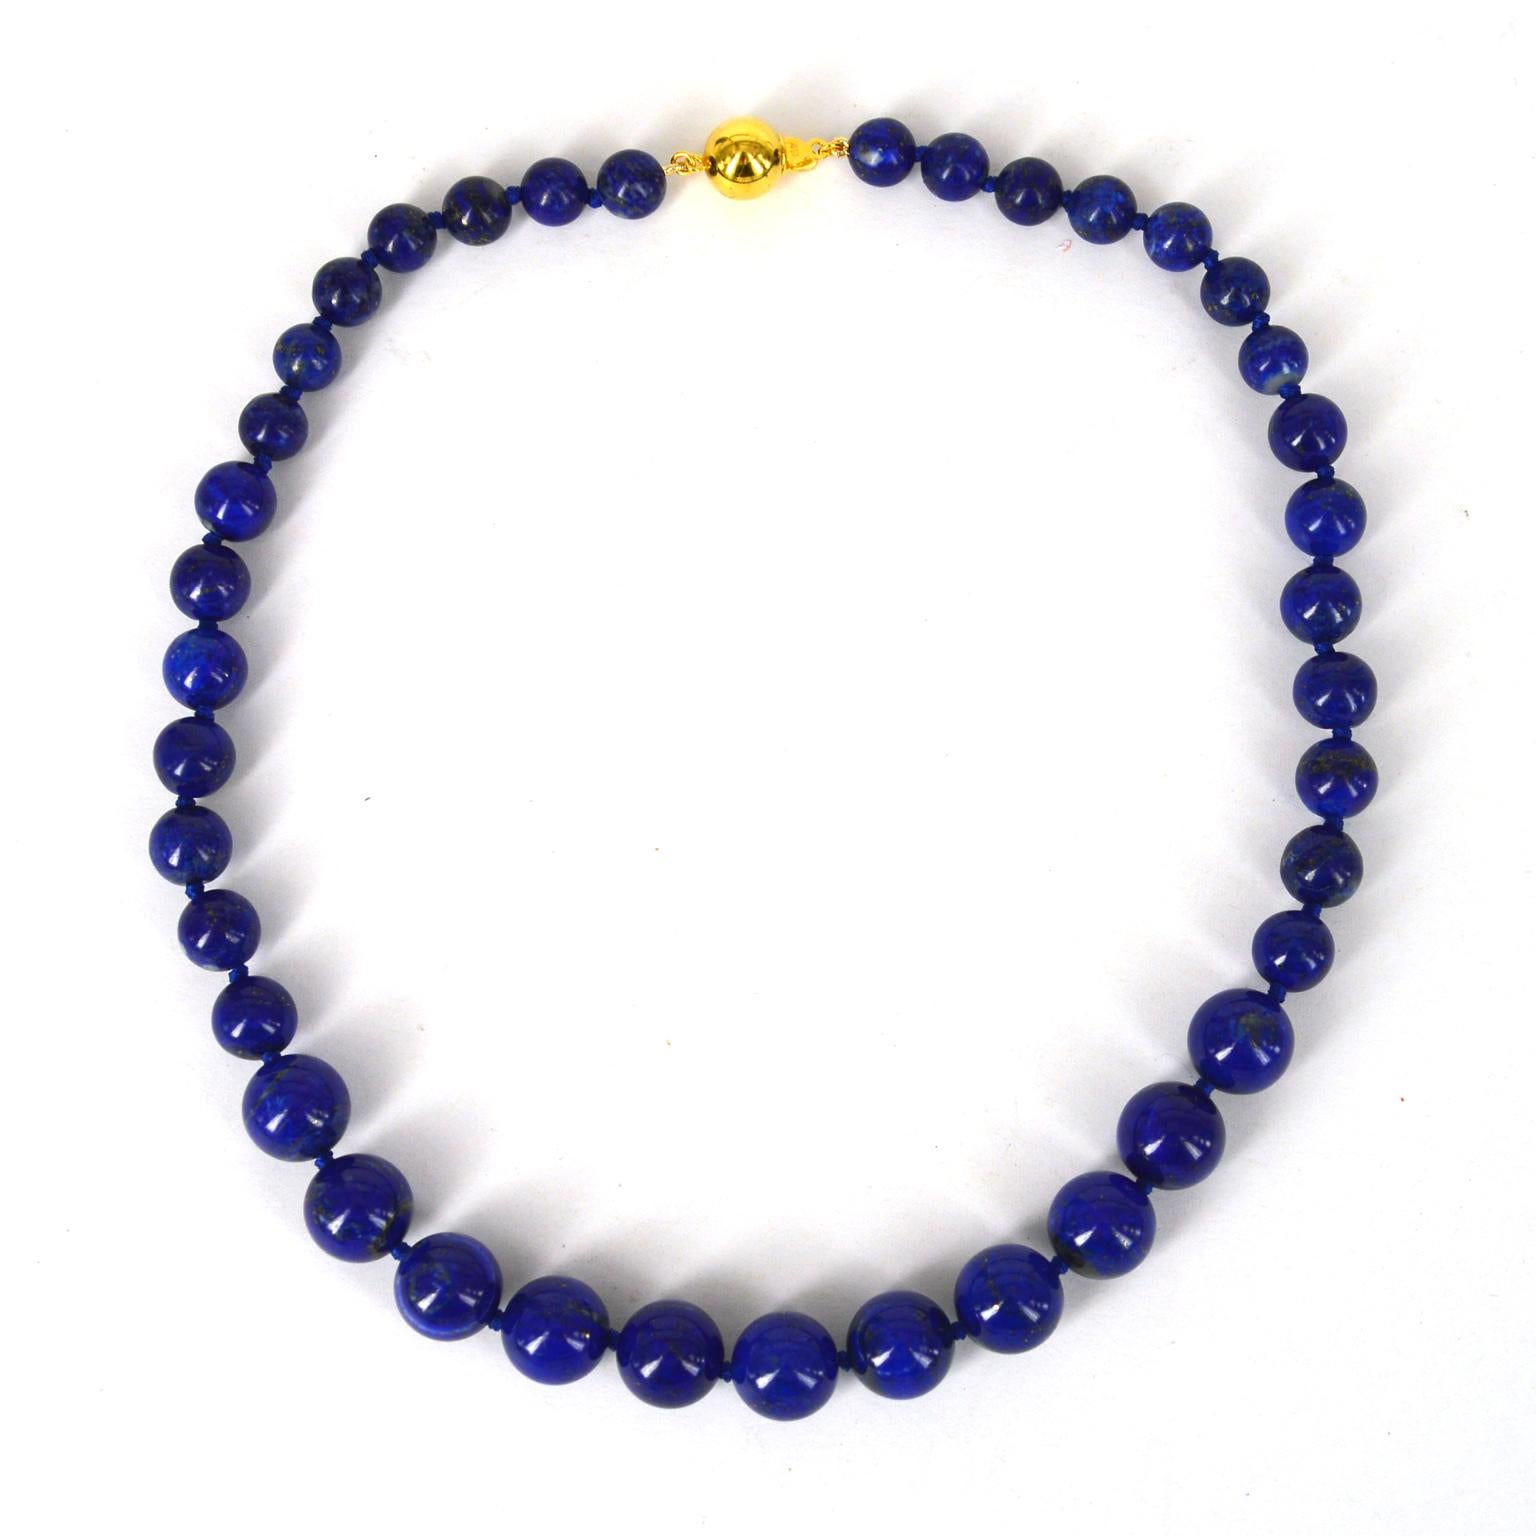 Graduated natural Lapis Lazuli beads 8mm-12mm hand knotted on blue thread with Gold plate Sterling Silver  10mm round clasp.
Total length of necklace 45cm.

